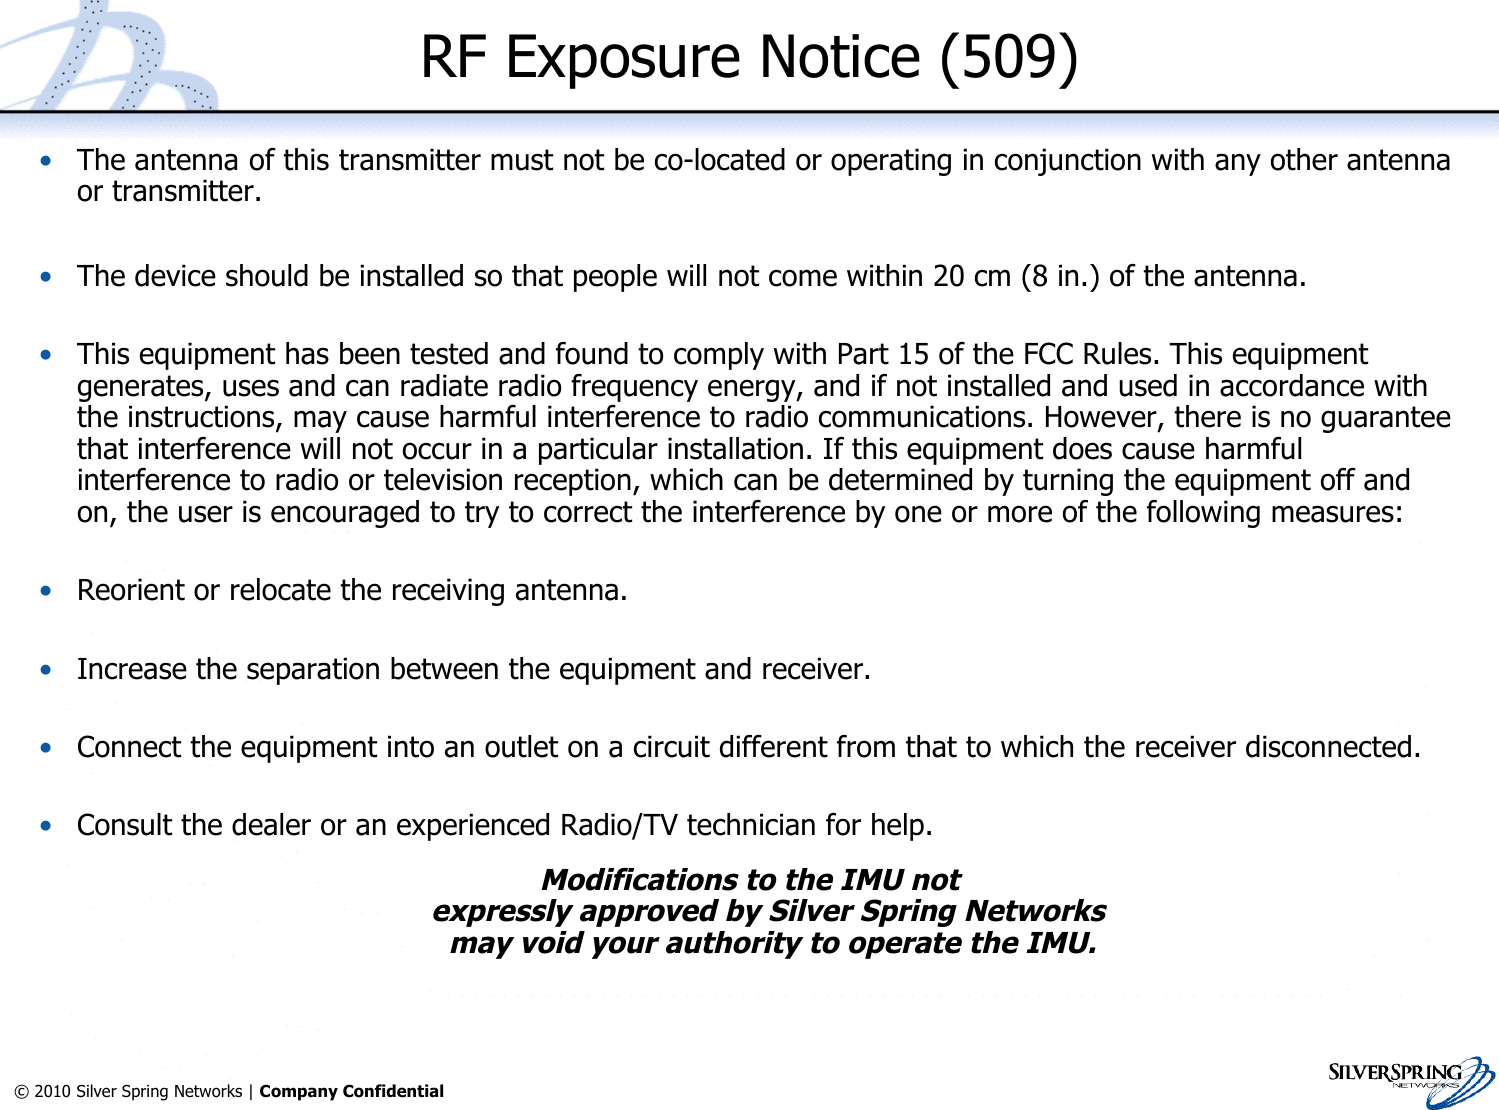 4© 2010 Silver Spring Networks | Company Confidential RF Exposure Notice (509)•The antenna of this transmitter must not be co-located or operating in conjunction with any other antennaor transmitter.•The device should be installed so that people will not come within 20 cm (8 in.) of the antenna.•This equipment has been tested and found to comply with Part 15 of the FCC Rules. This equipmentgenerates, uses and can radiate radio frequency energy, and if not installed and used in accordance withthe instructions, may cause harmful interference to radio communications. However, there is no guaranteethat interference will not occur in a particular installation. If this equipment does cause harmfulinterference to radio or television reception, which can be determined by turning the equipment off andon, the user is encouraged to try to correct the interference by one or more of the following measures:•Reorient or relocate the receiving antenna.•Increase the separation between the equipment and receiver.•Connect the equipment into an outlet on a circuit different from that to which the receiver disconnected.•Consult the dealer or an experienced Radio/TV technician for help.Modifications to the IMU notexpressly approved by Silver Spring Networks may void your authority to operate the IMU.